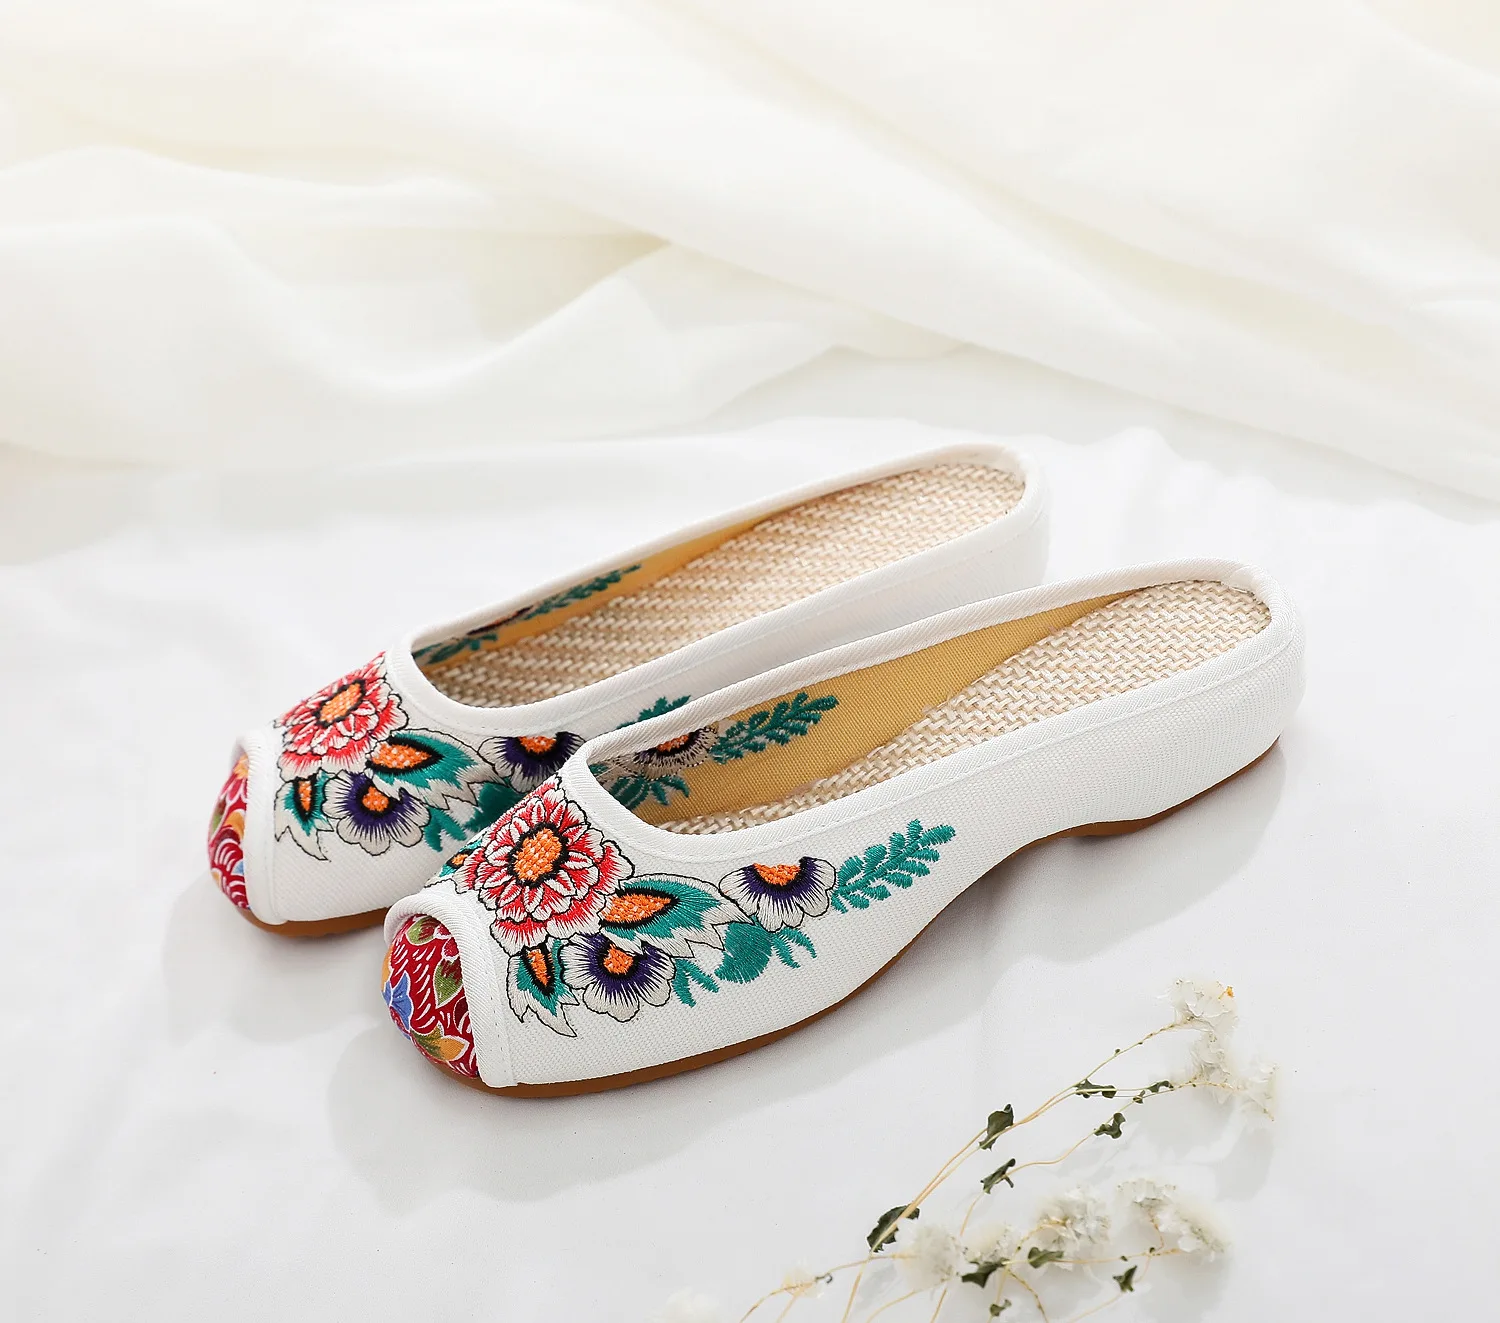 

Old Beijing cloth shoes new style Baotou embroidered inner heightened ethnic style sandals and slippers home slippers